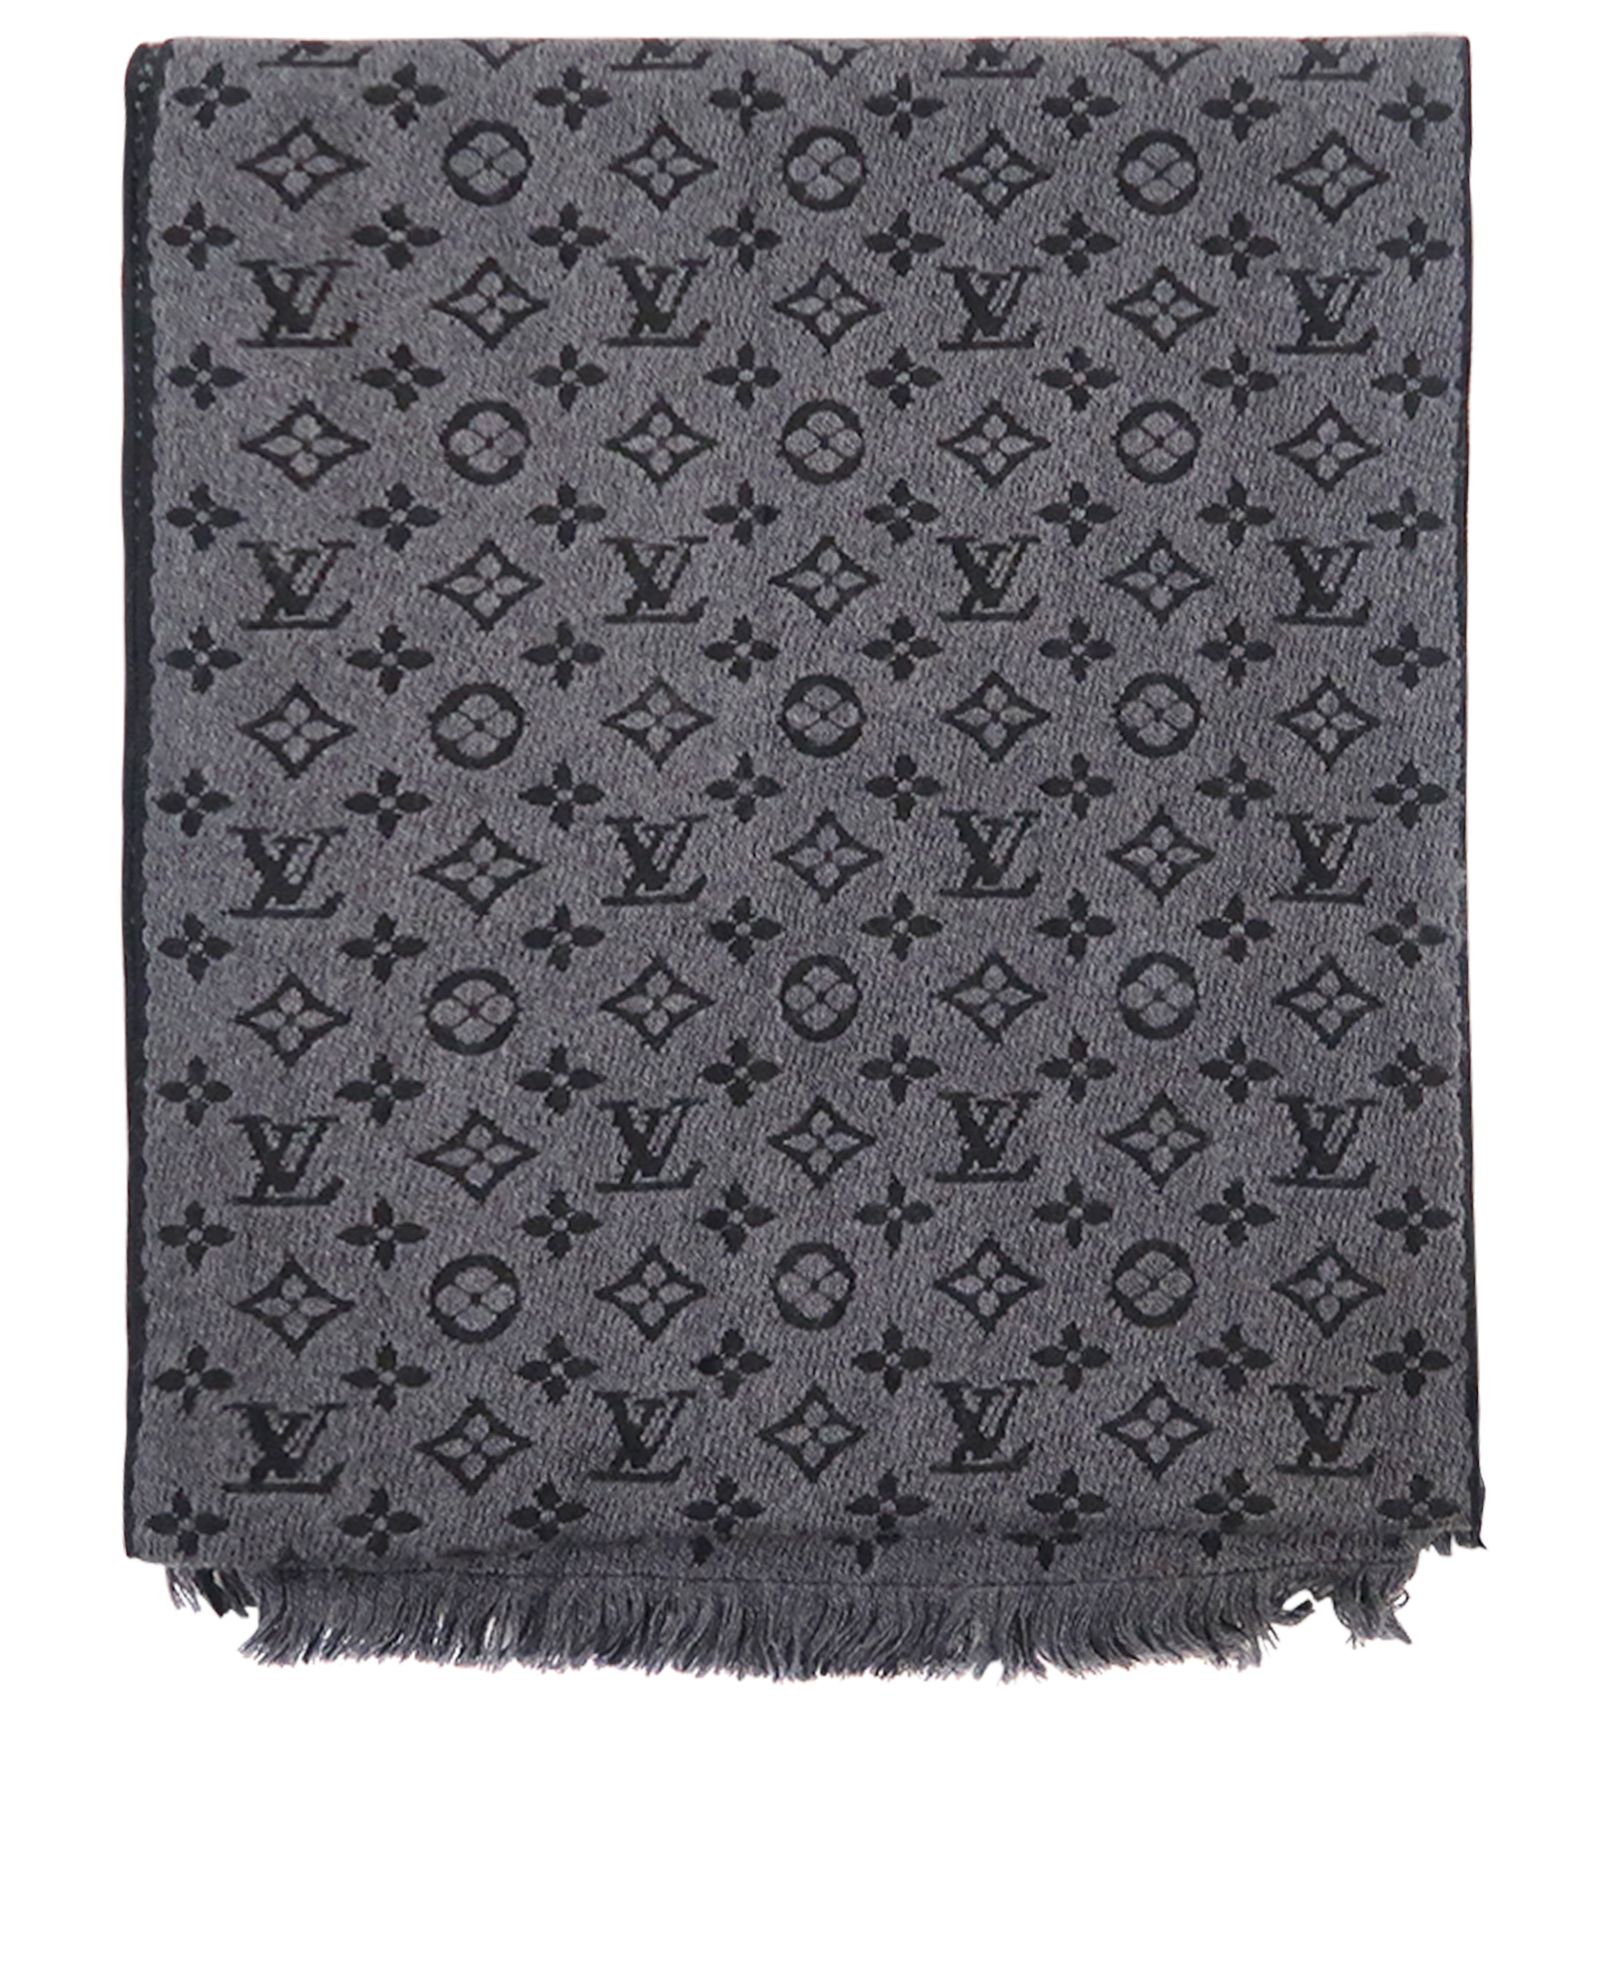 Louis Vuitton Scarf - How to Wear and Where to Buy